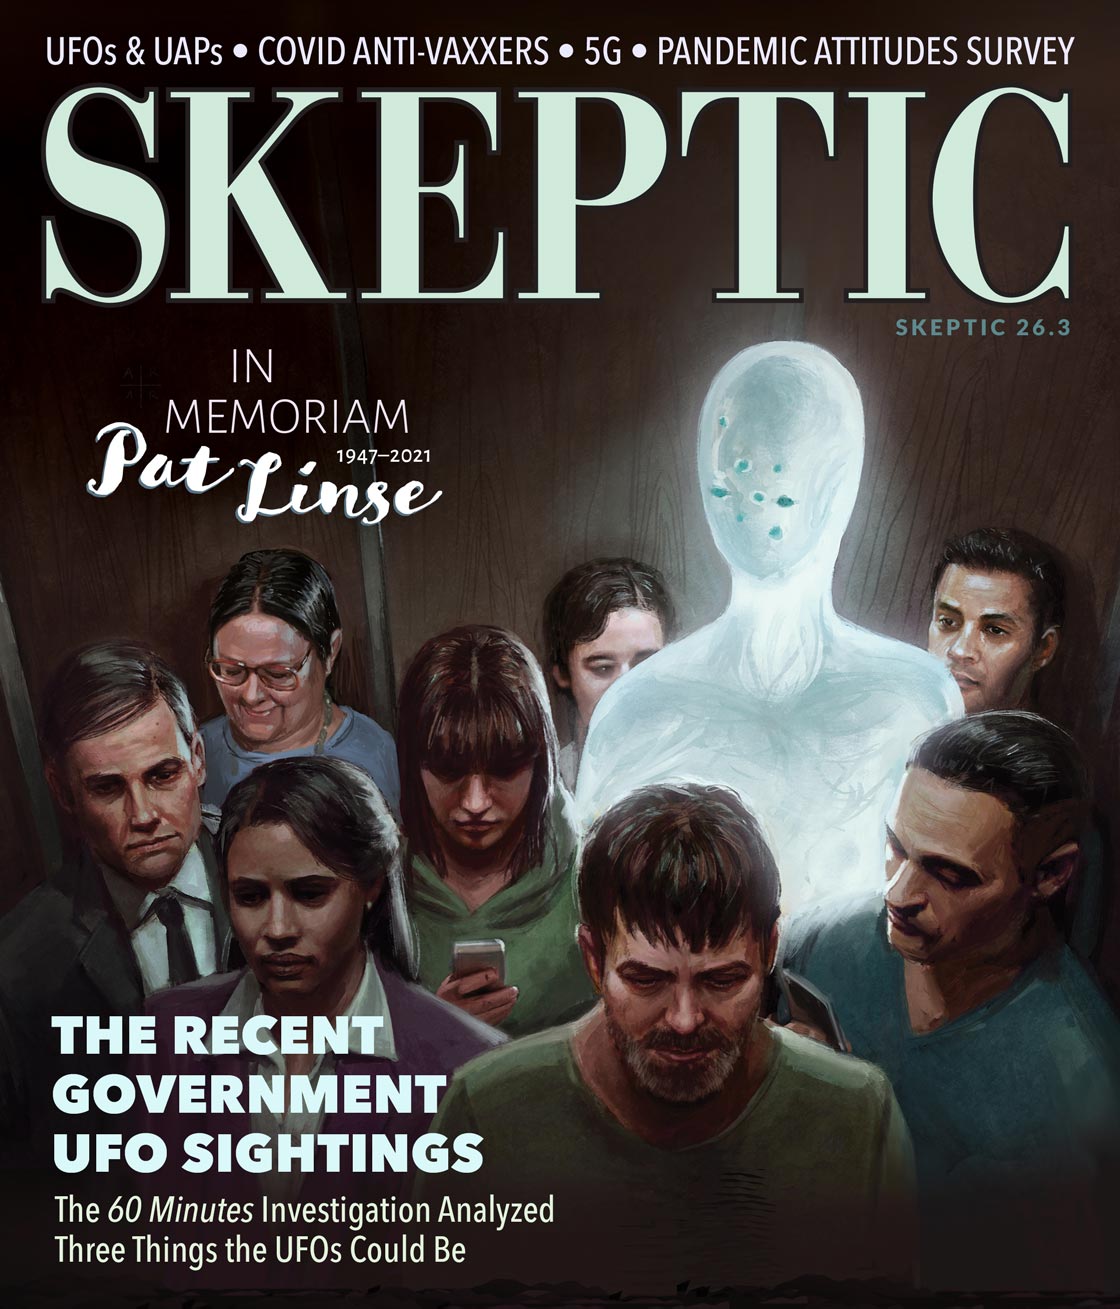 Skeptic » The Michael Shermer Show » Antonio Damasio — Feeling & Knowing:  Making Minds Conscious